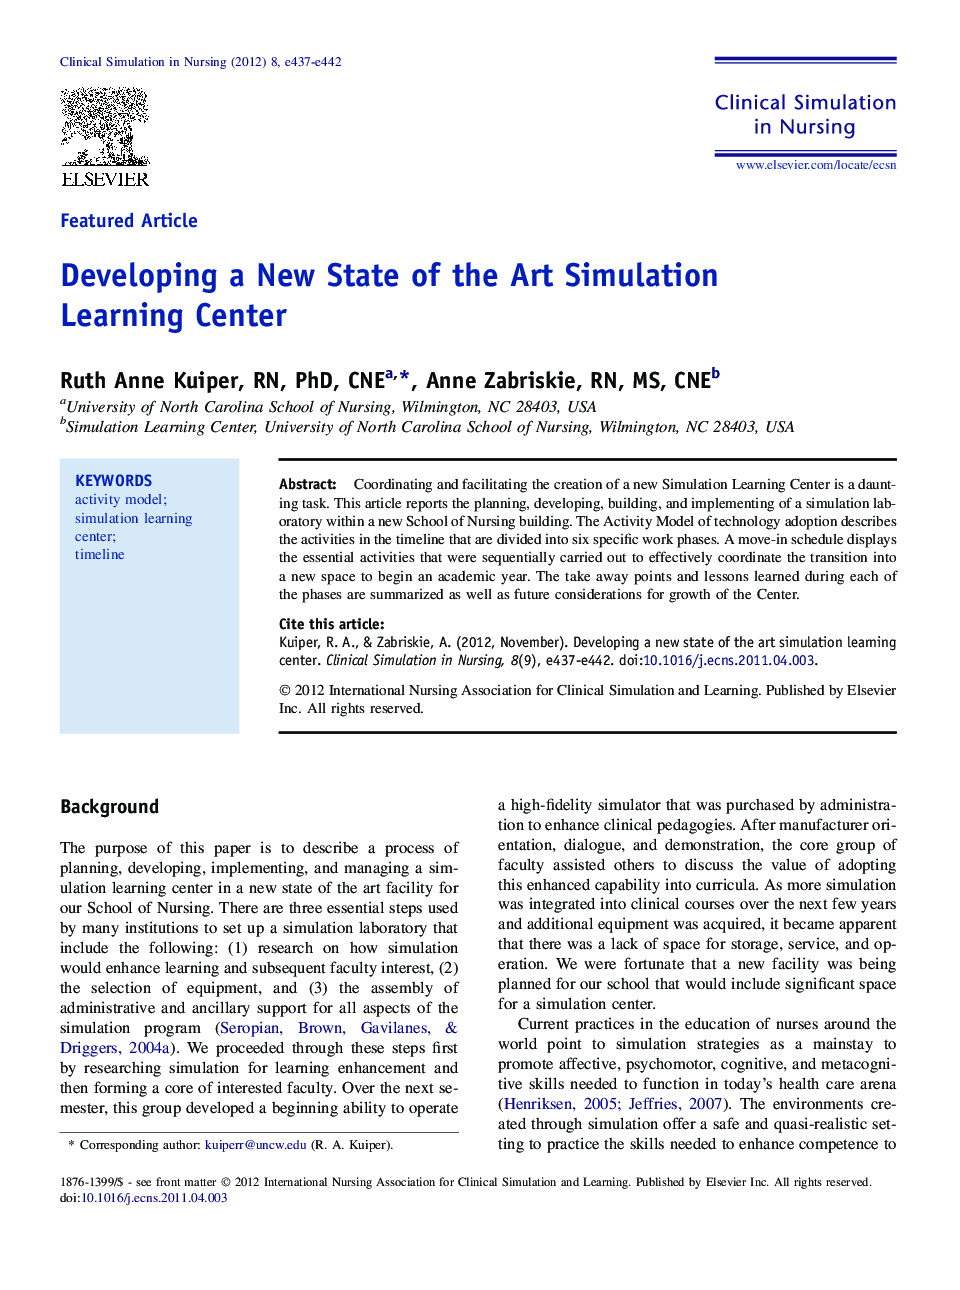 Developing a New State of the Art Simulation Learning Center